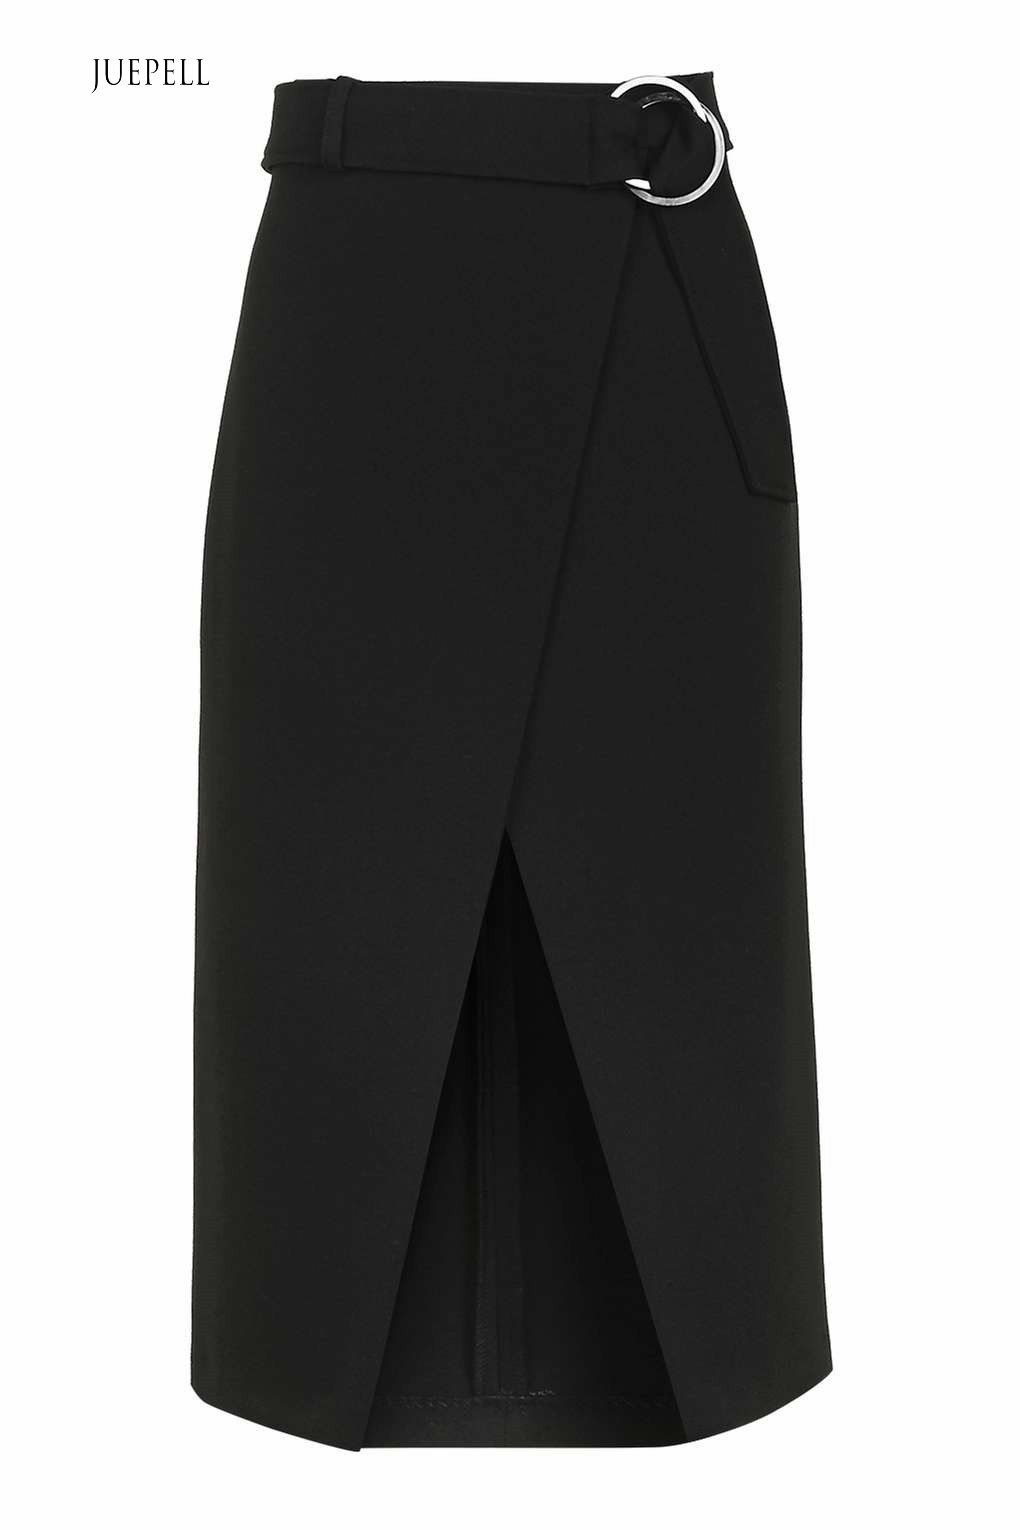 New Arrival Belted Wrap MIDI Skirt